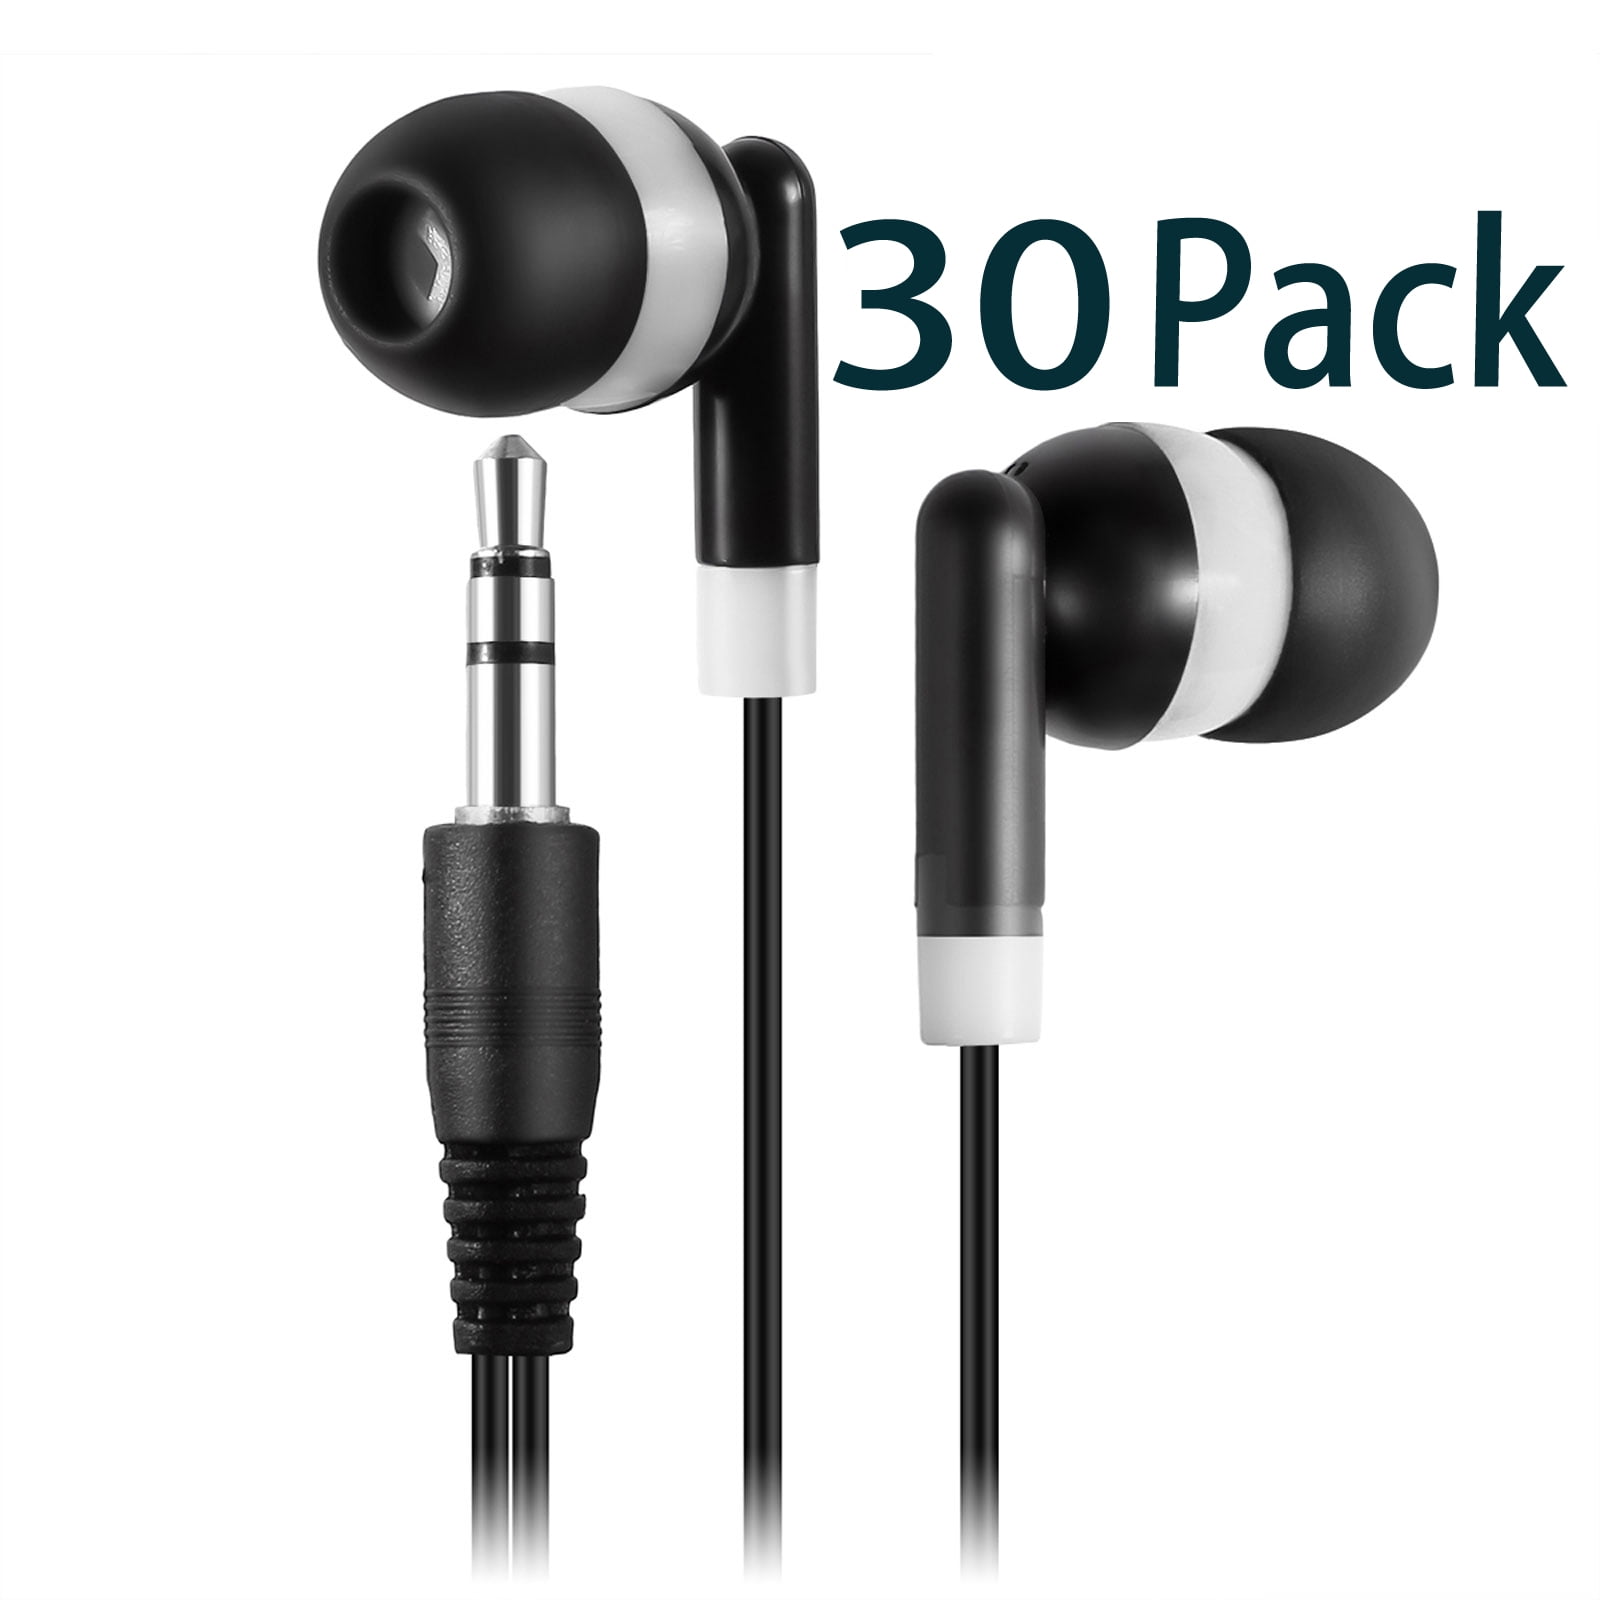 Factorymall Wholesale Disposable Earbuds Earphones Headphones for School,Students,Library Computer Lab,Donate Bulk Earbuds 50 Pack Multi Colored for Classroom Kids Child Teen 